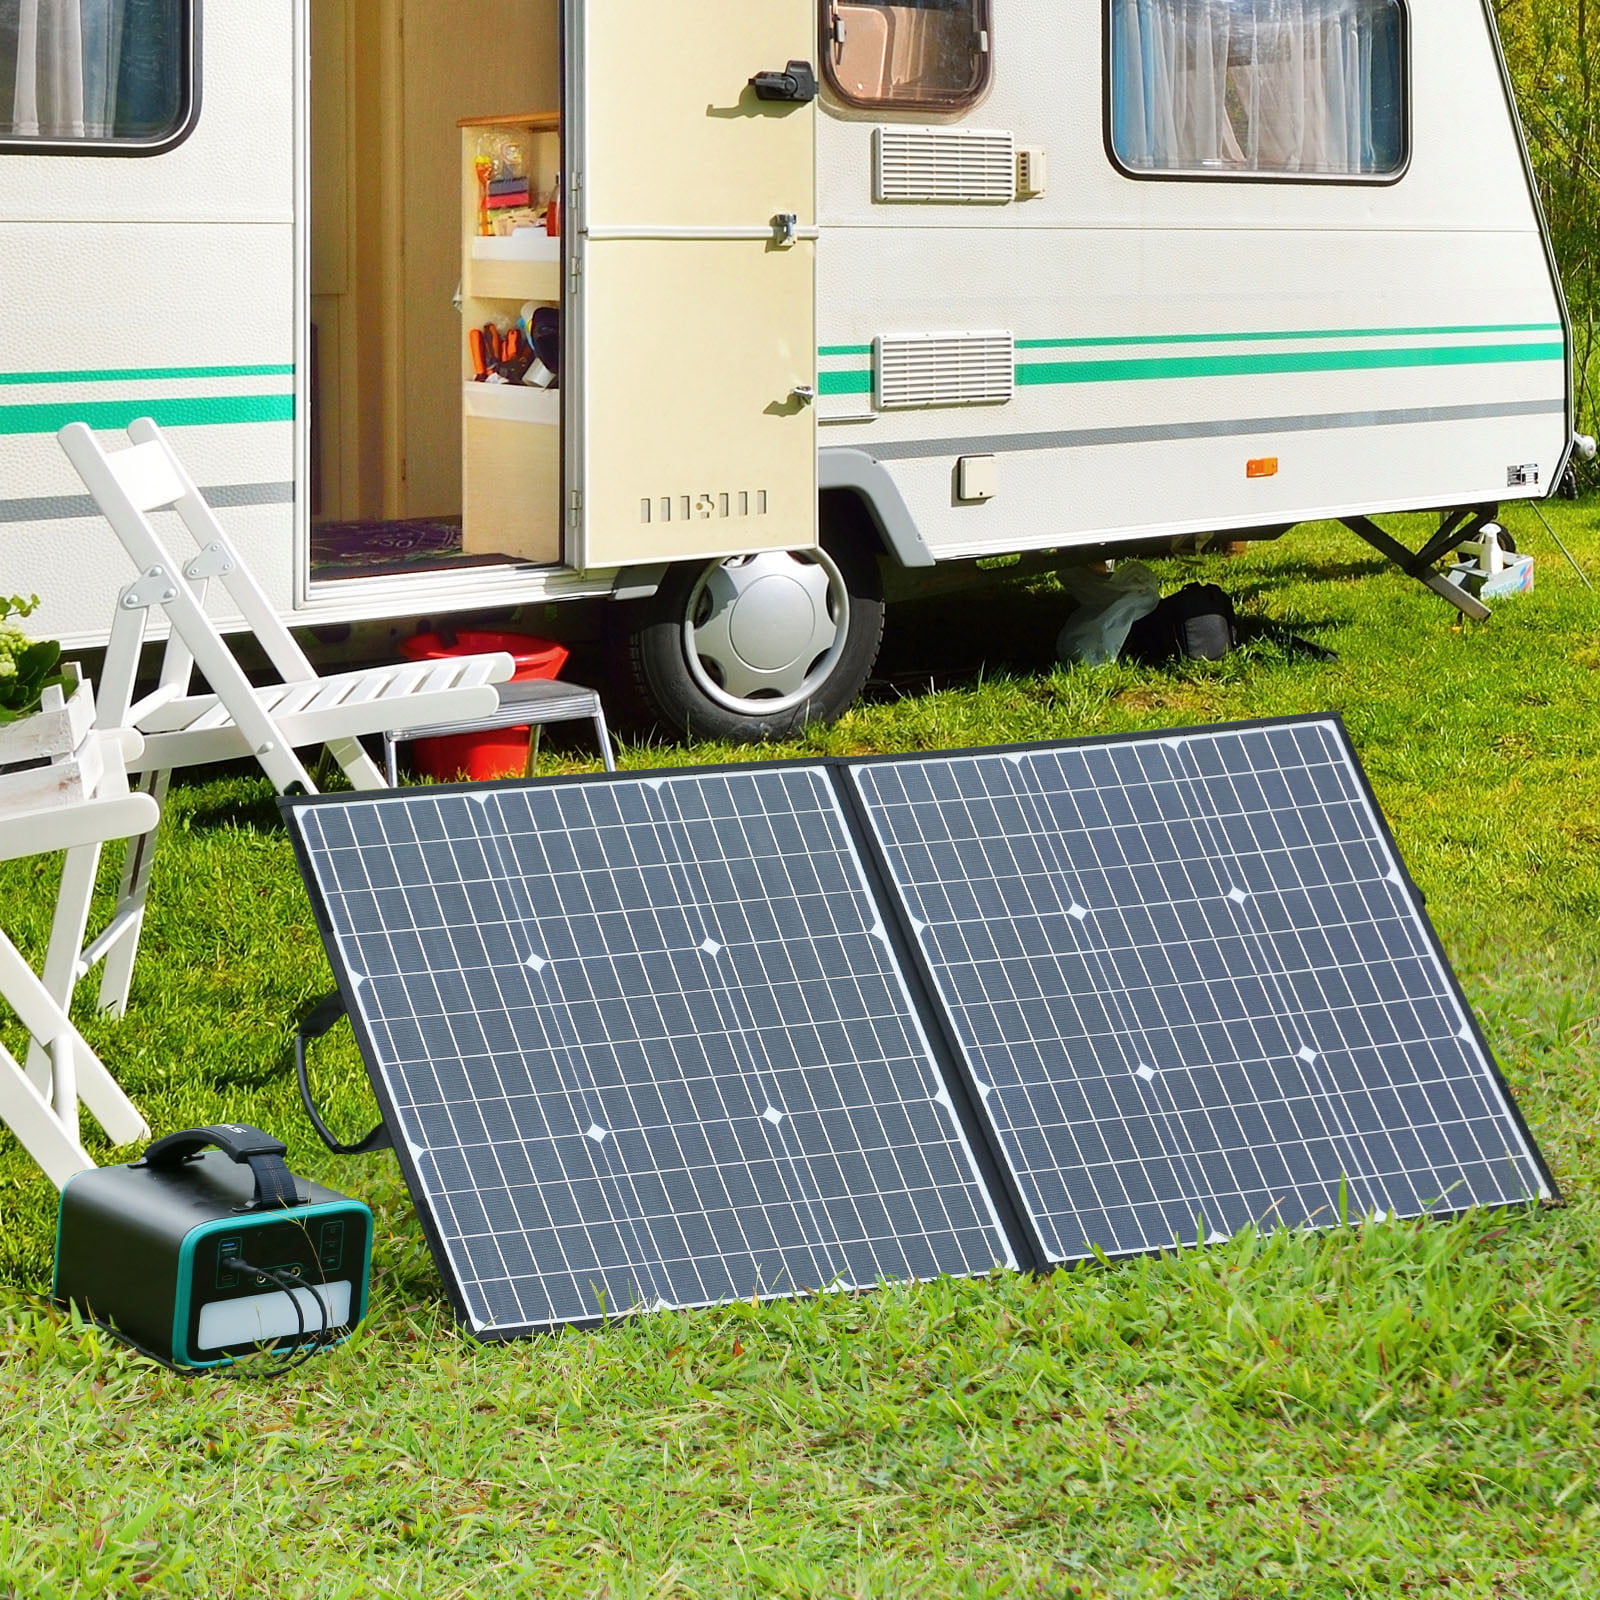 Portable Foldable Solar Charger with USB Ports for Summer Camping Van RV AIPER Portable Solar Panel 100W for Suaoki/Jackery/Goal Zero Yeti/Rockpals/Paxcess Portable Power Station as Solar Generator 